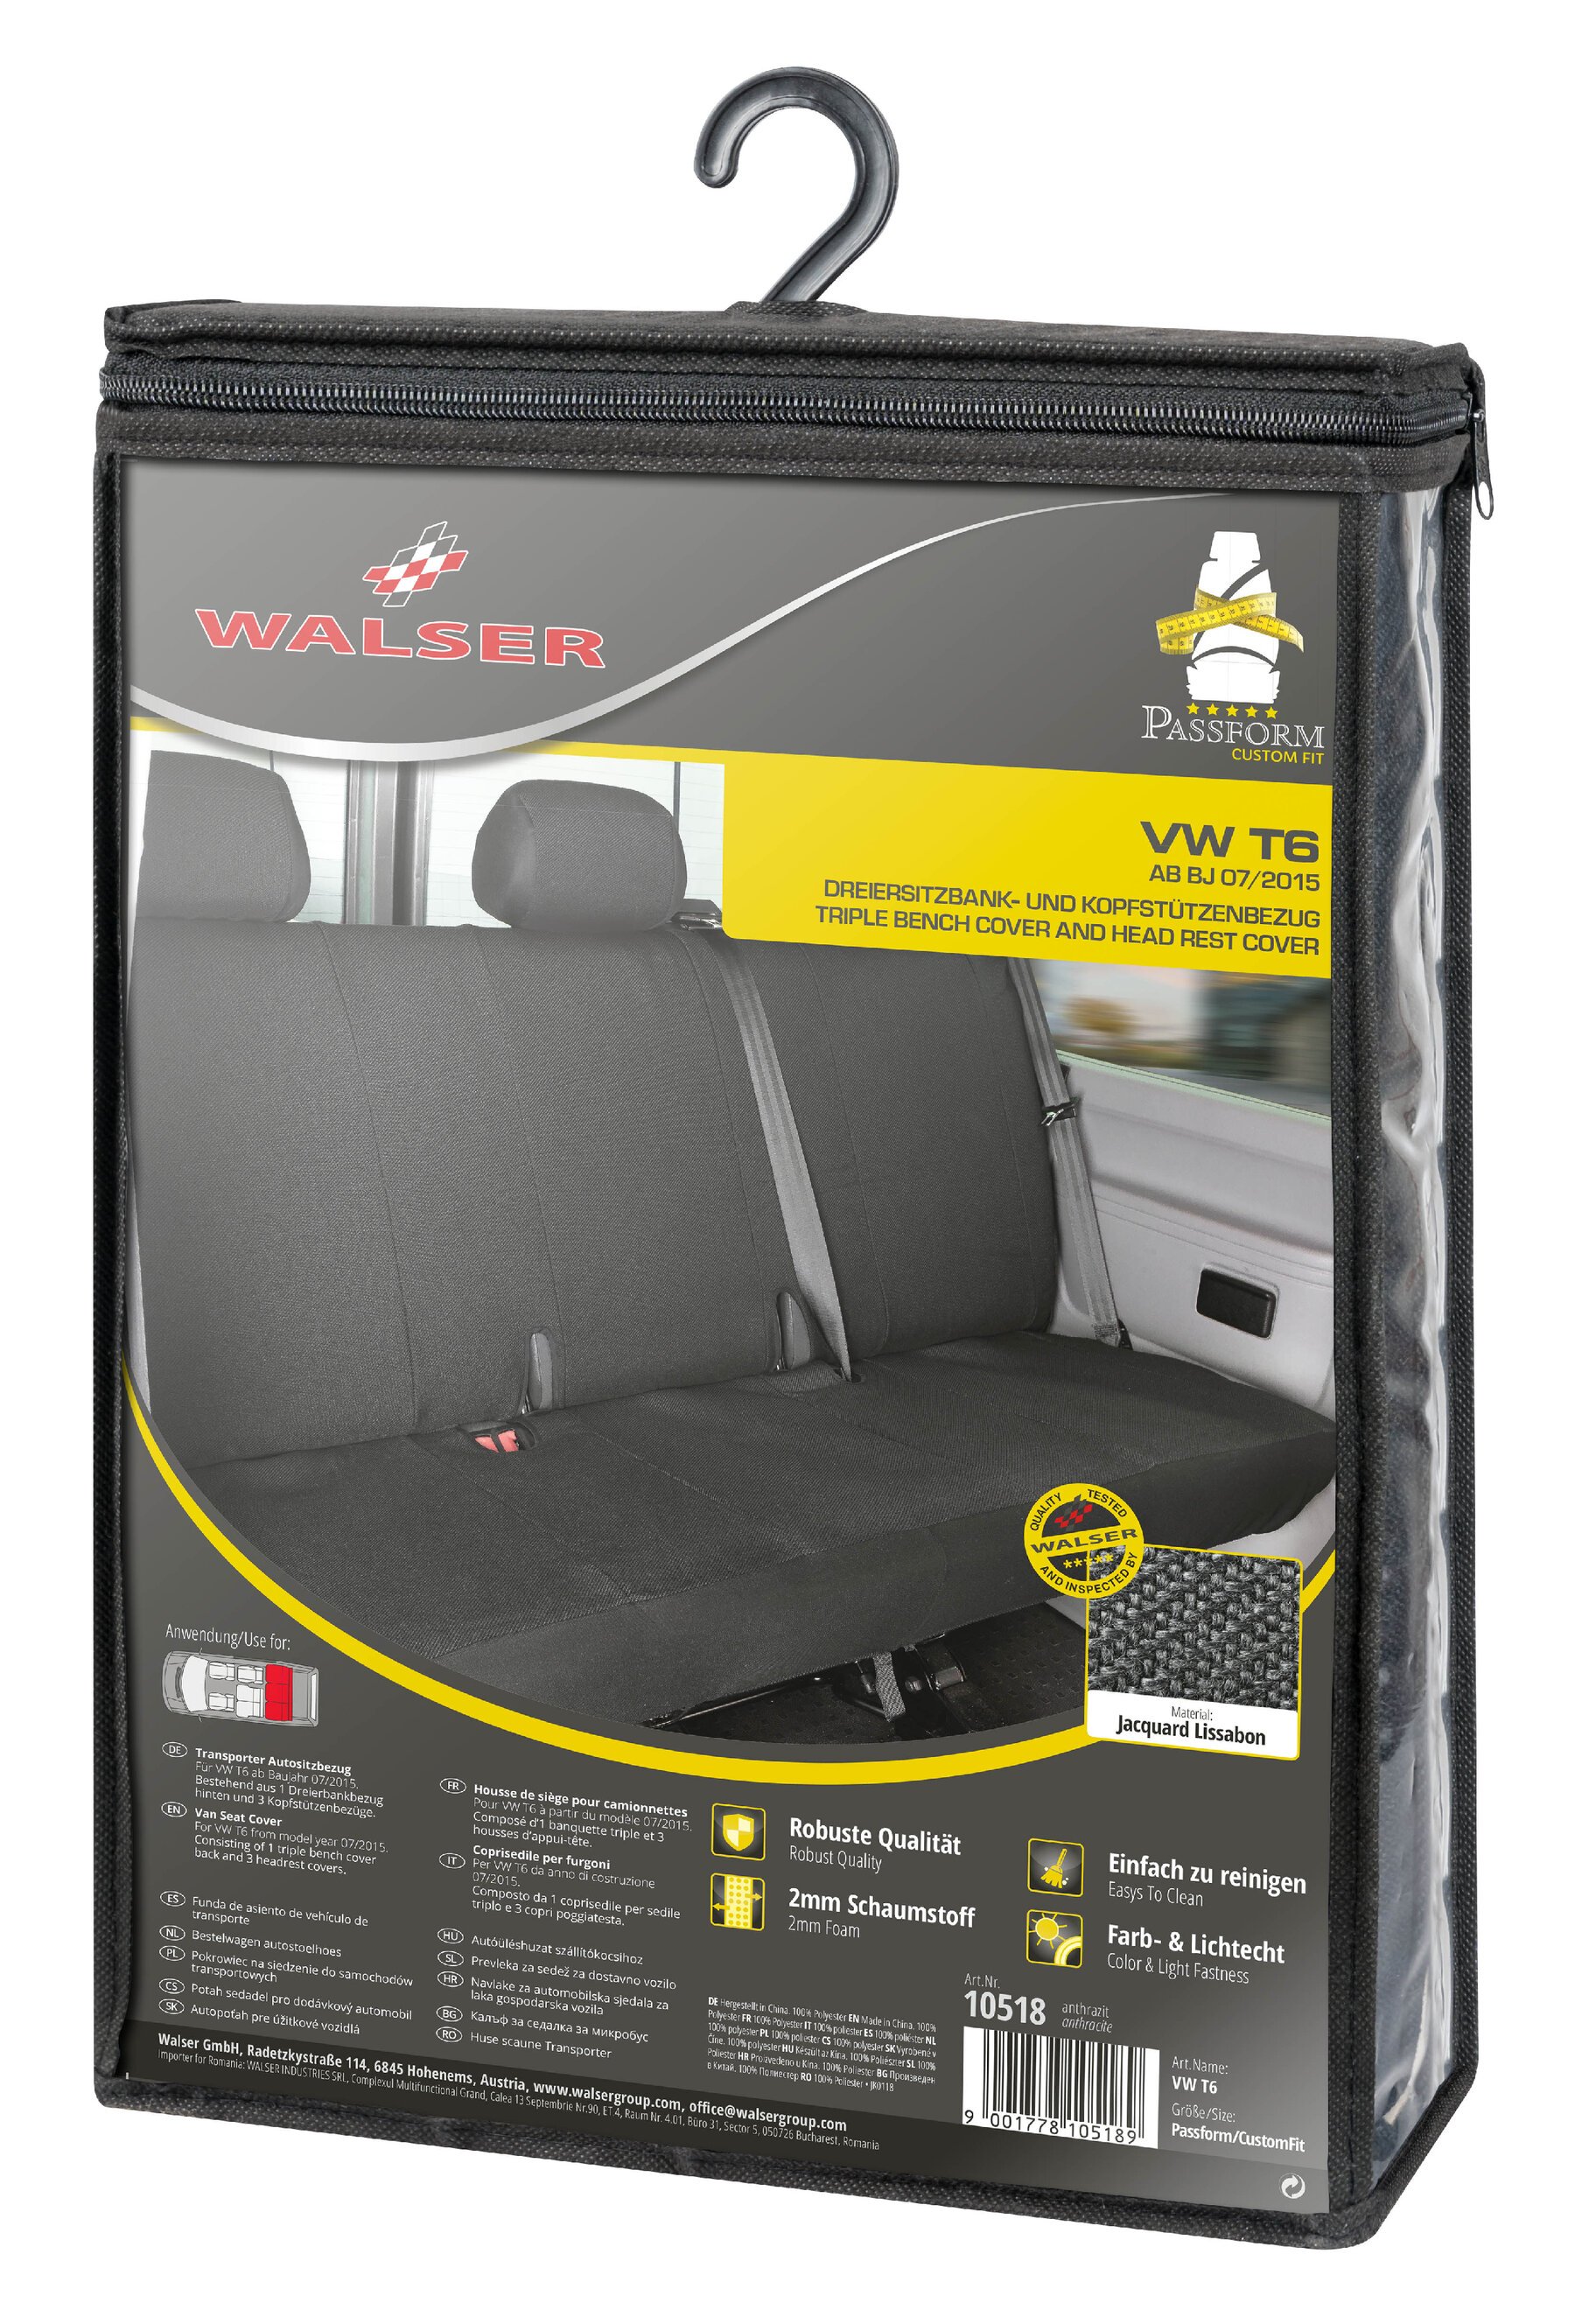 Car Seat cover Transporter made of fabric for VW T6, 3-seater bench